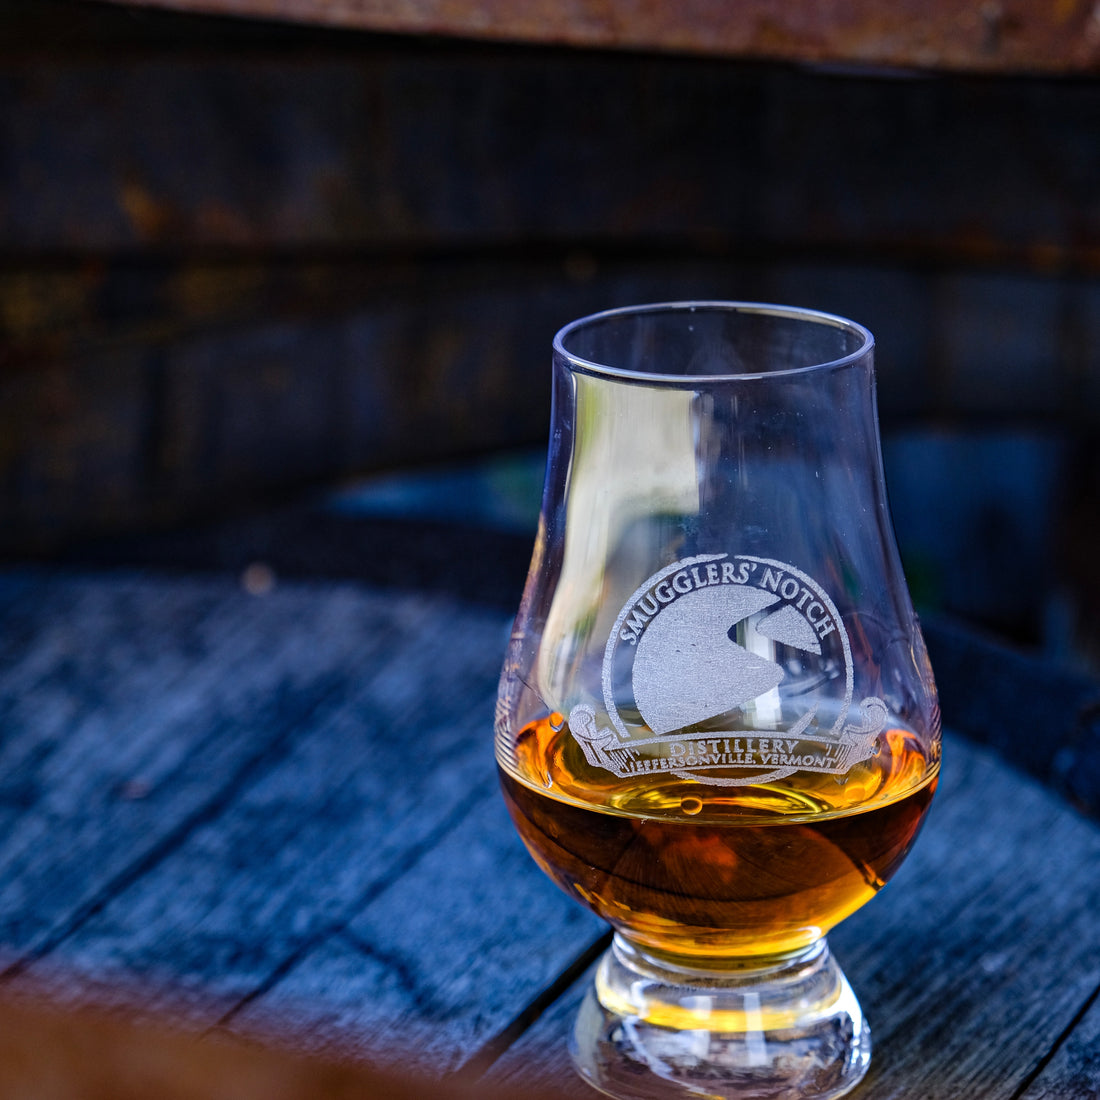 Who really uses a Glencairn whiskey tasting glass, anyway?